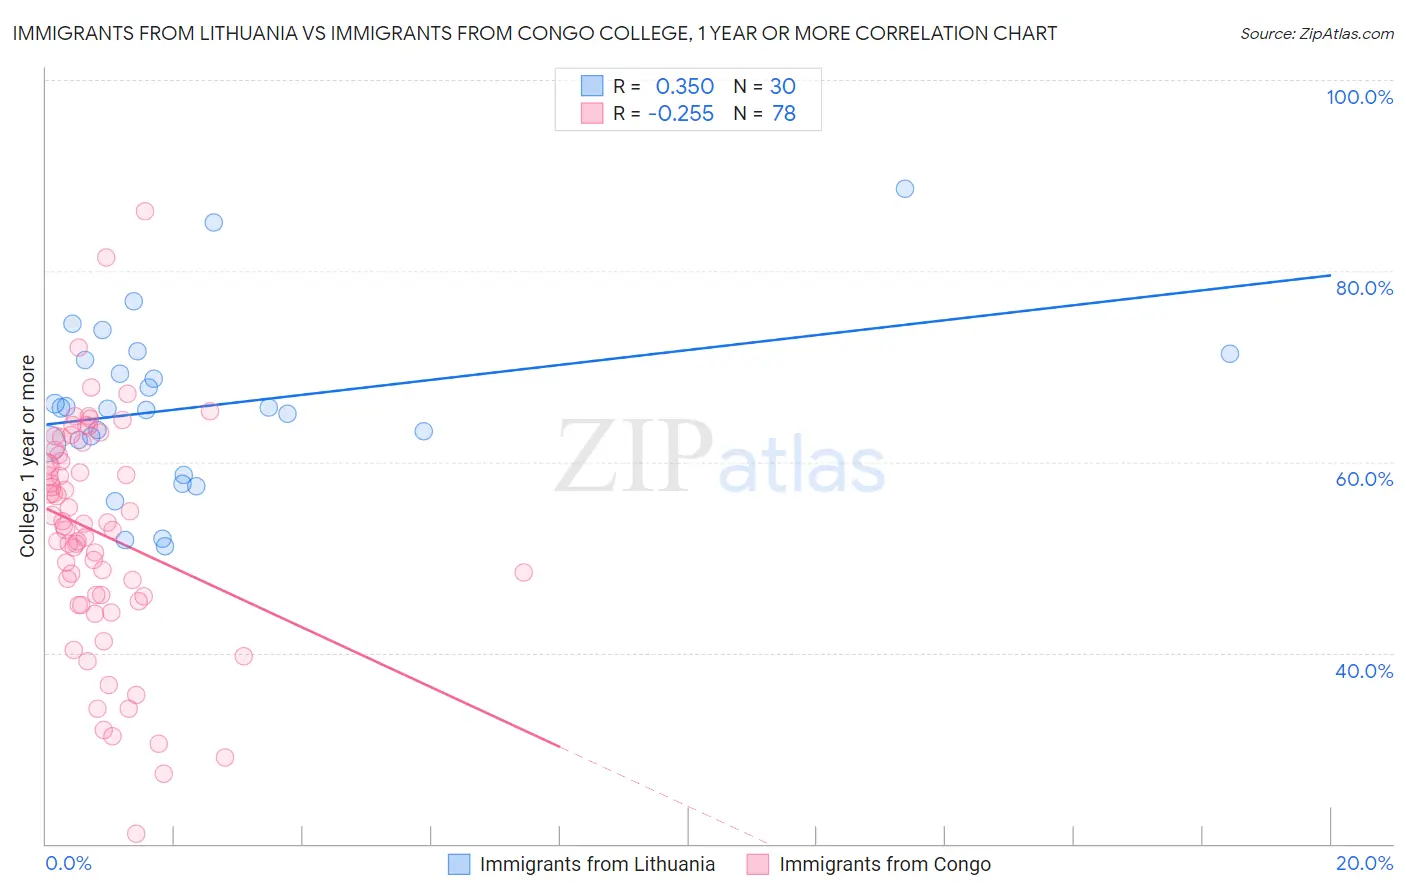 Immigrants from Lithuania vs Immigrants from Congo College, 1 year or more